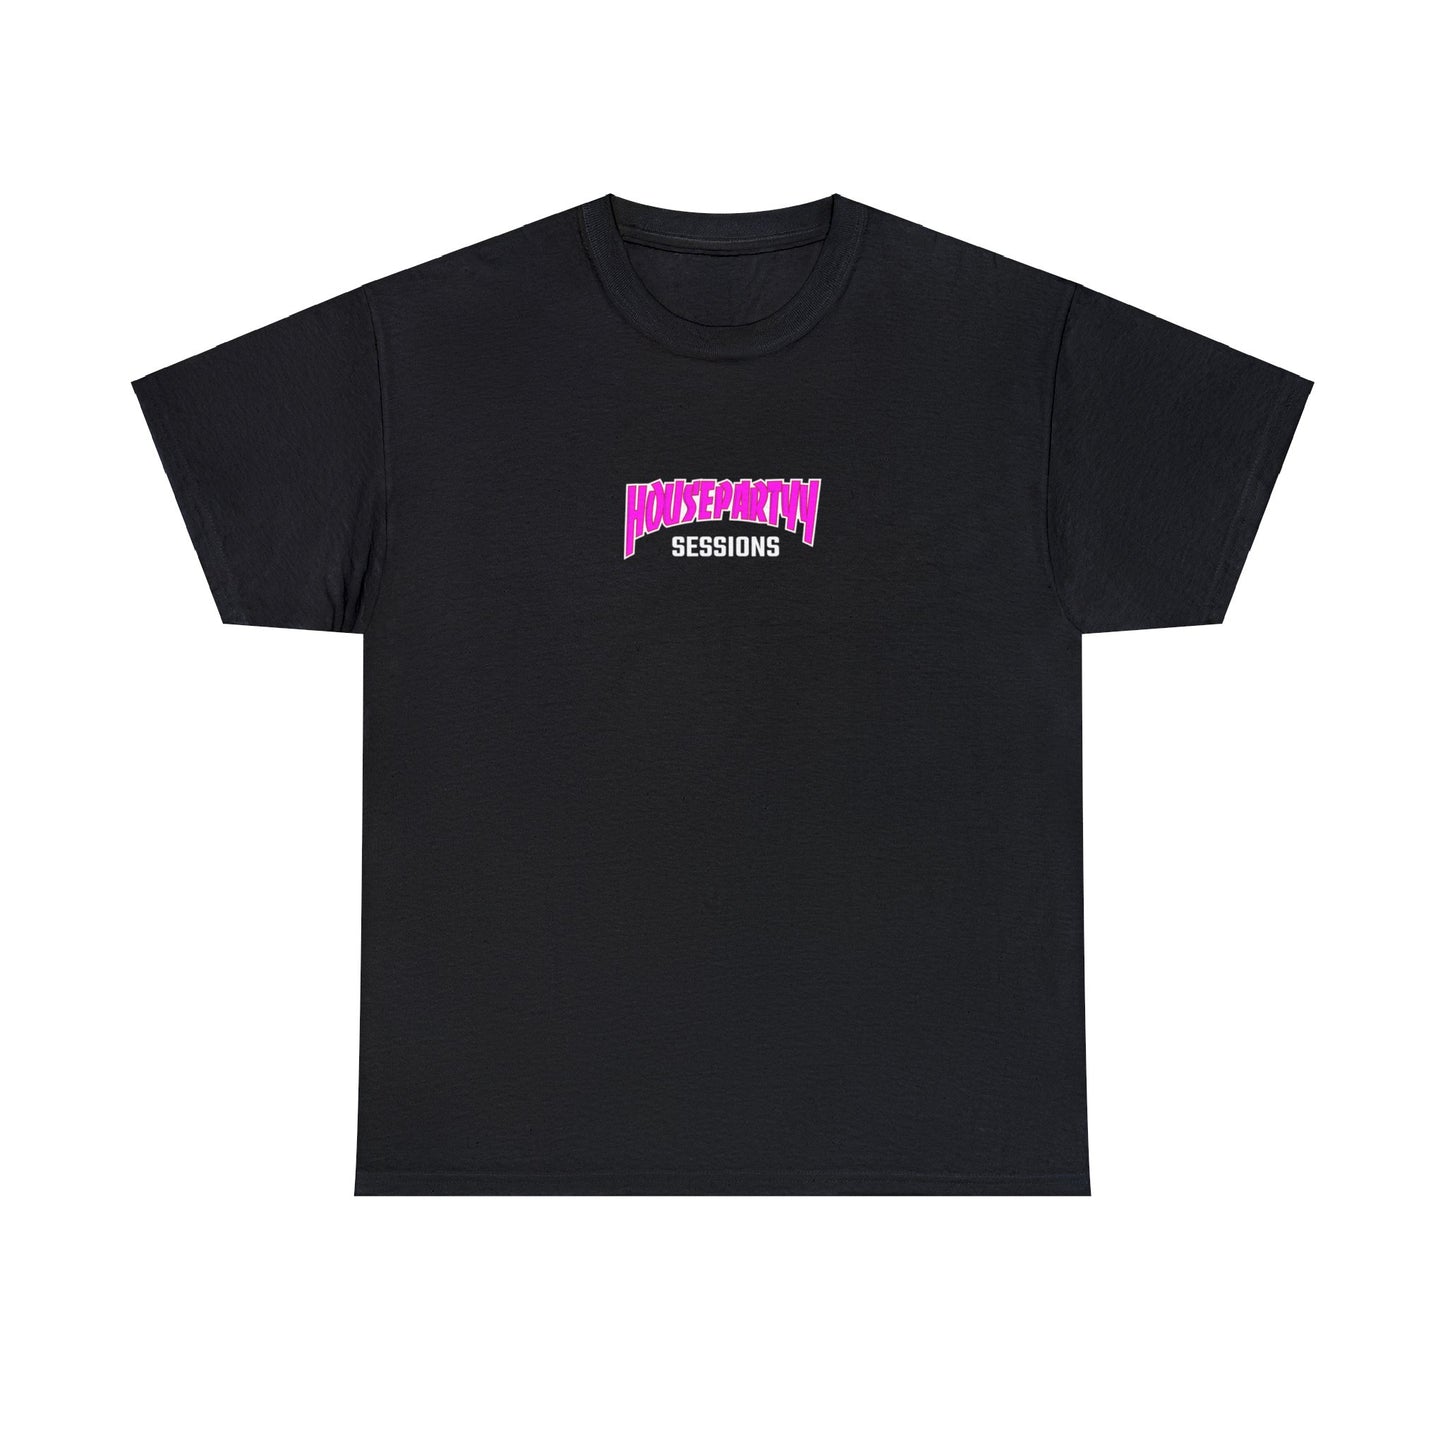 The Sessions Tee ™